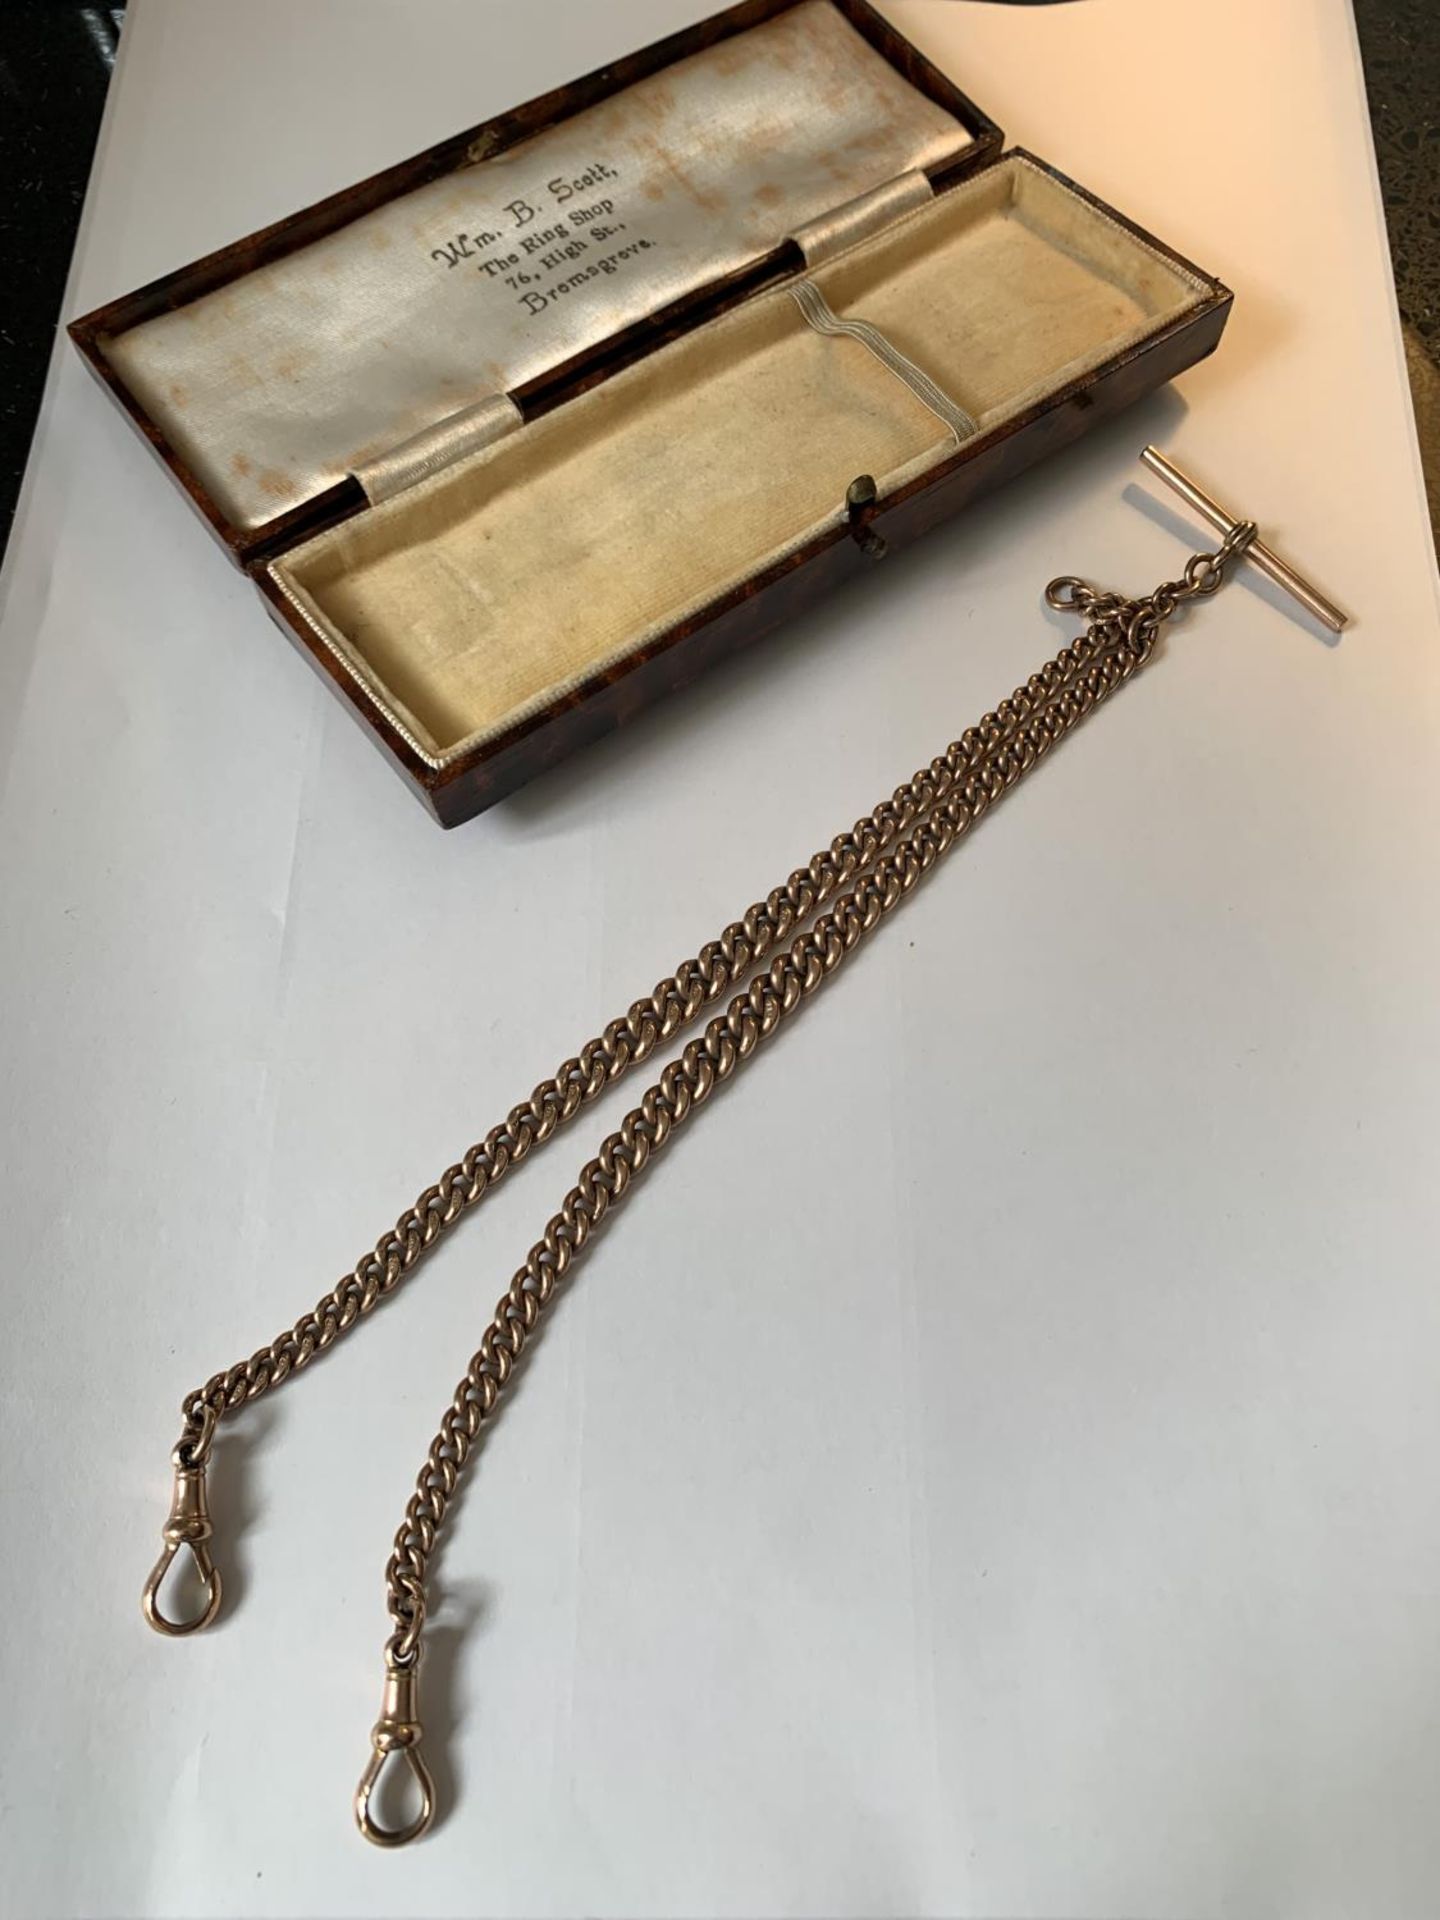 A 9 CARAT GOLD WATCH CHAIN WITH T BAR GROSS WEIGHT 38.22 GRAMS IN A PRESENTATION BOX